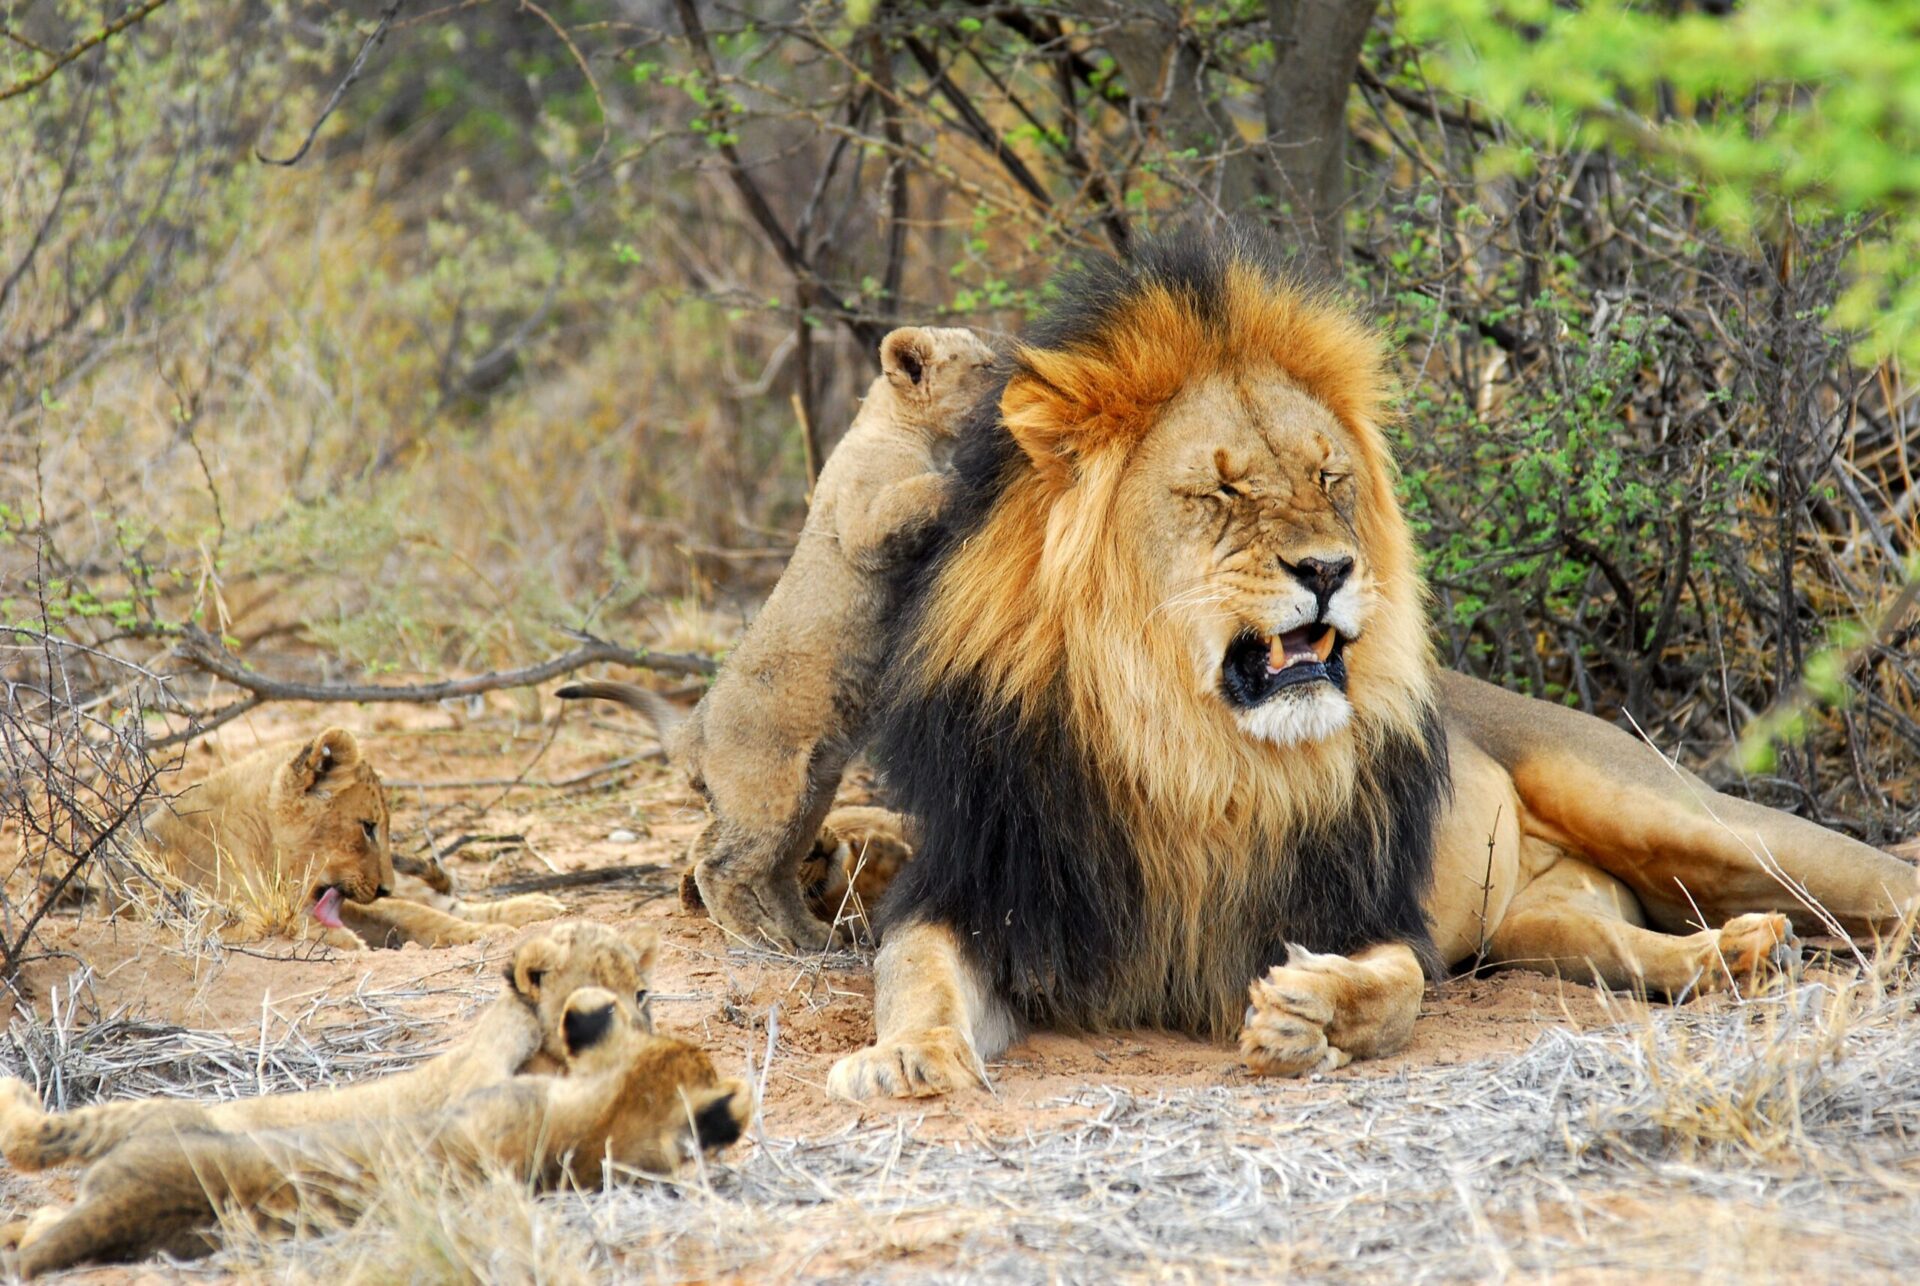 black maned lion with three adorable cubs playing around him under a shaded tree in southern kalahari